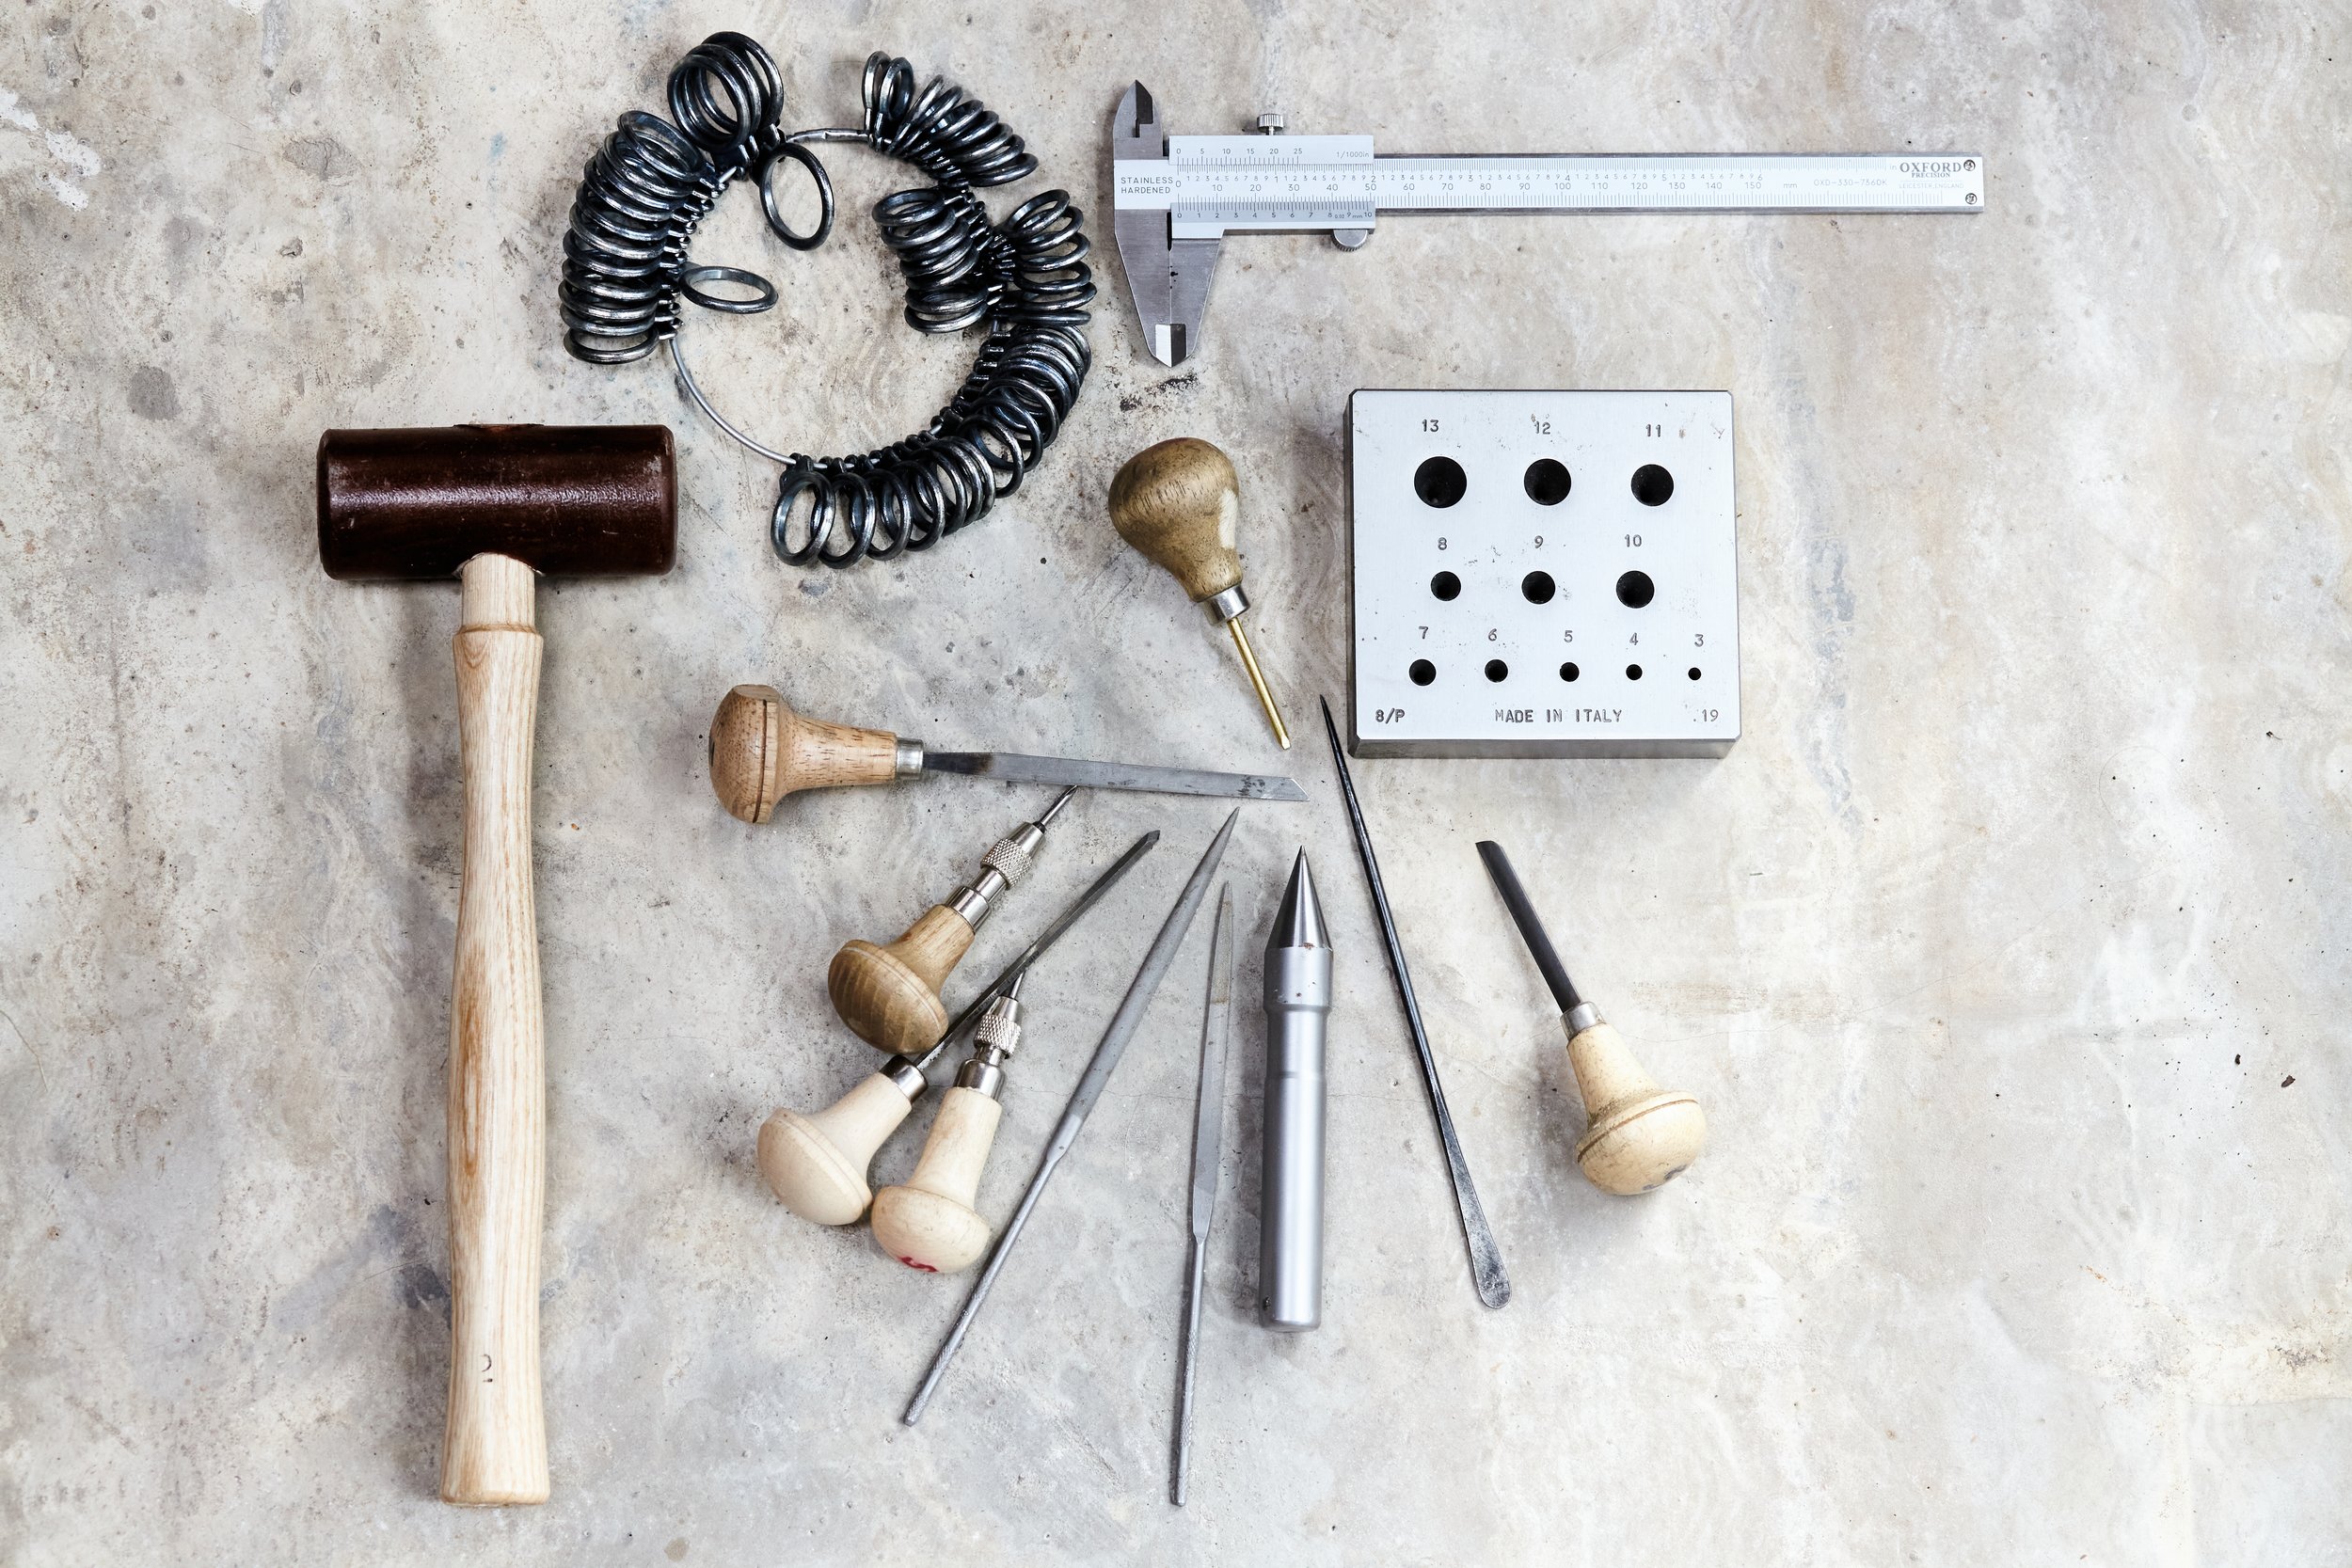 Still life photograph by Hatty Frances Bell of Heidi Hockenjo's tools on a concrete floor in Stroud